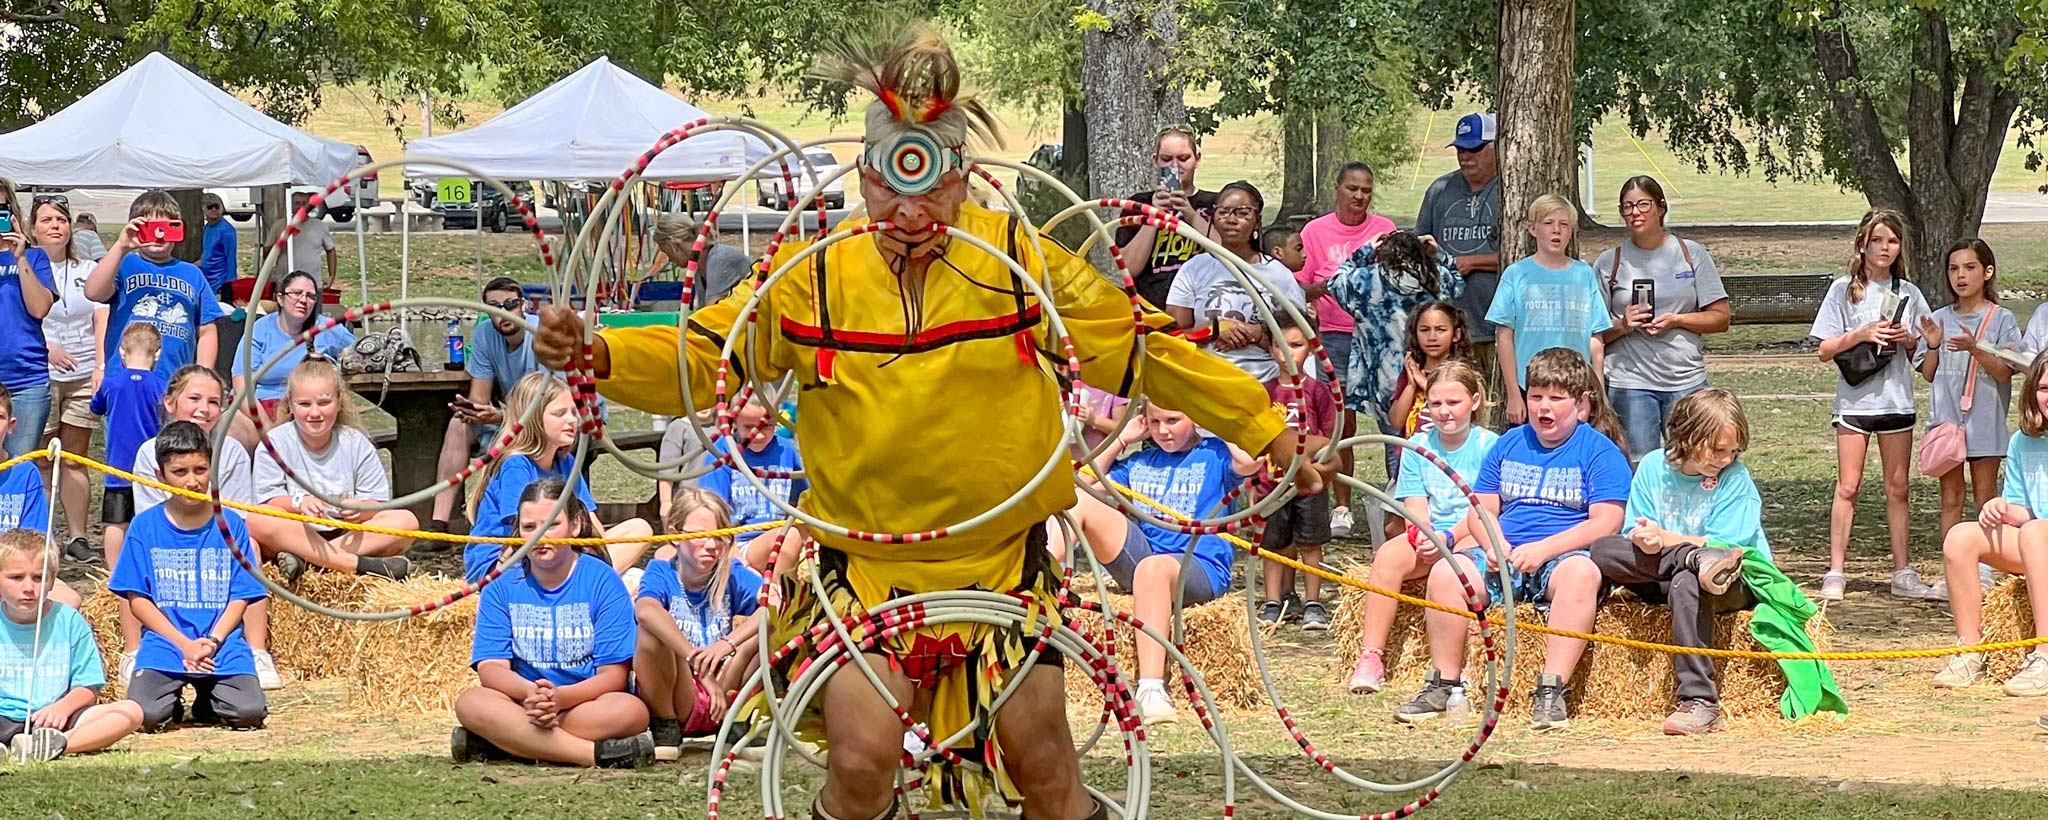 A Native American hoop dancer leads a demonstration for a large group of school children at the Oka Kapassa Native American Festival in Tuscumbia, Alabama